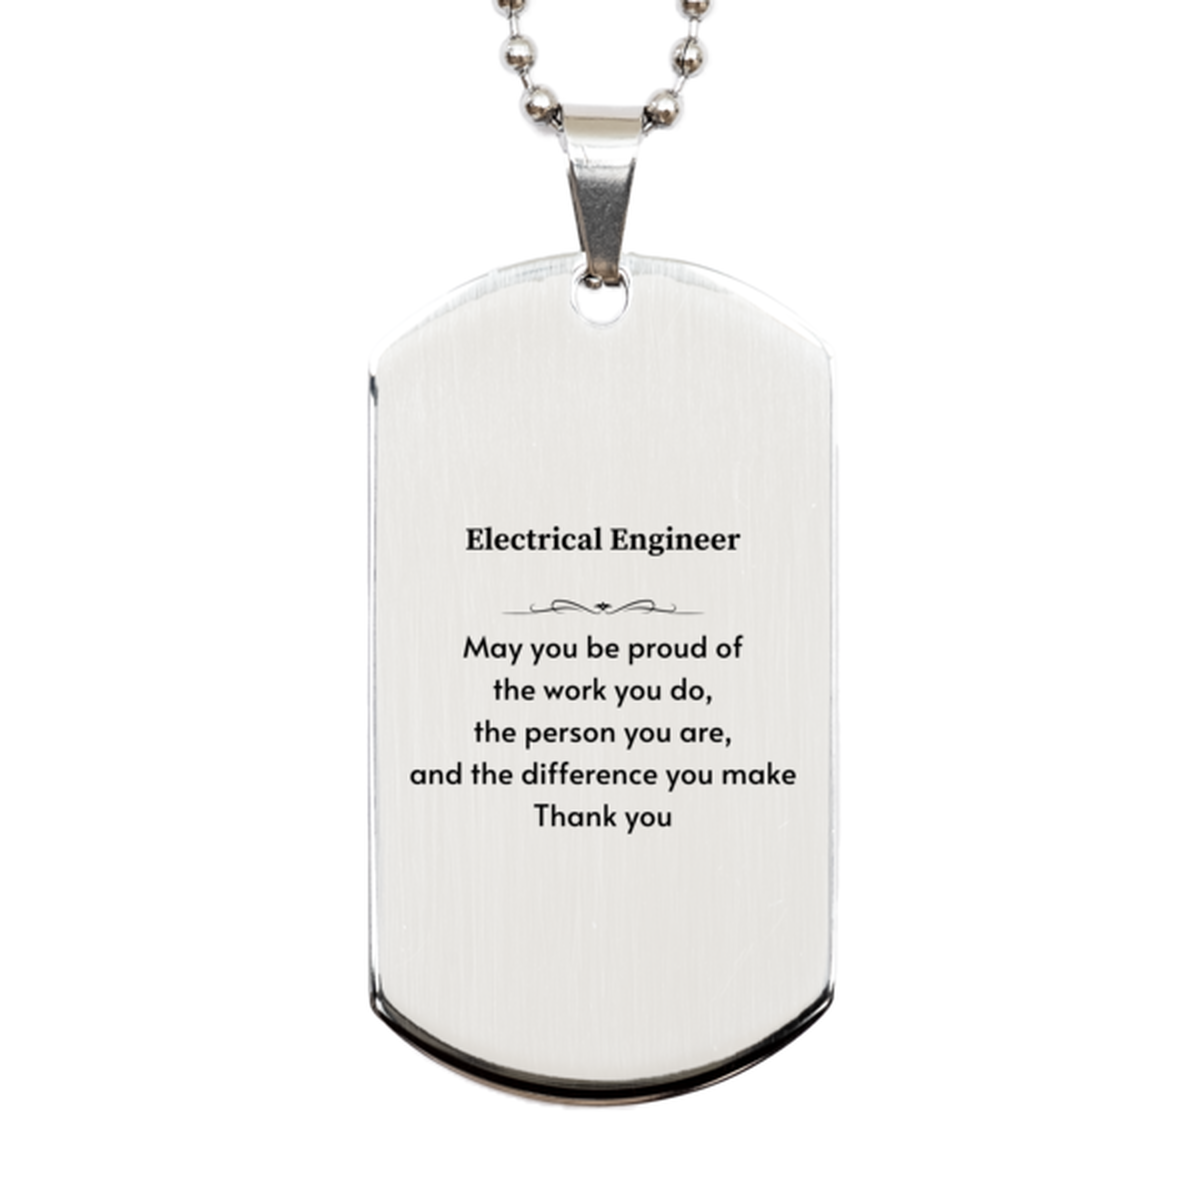 Heartwarming Silver Dog Tag Retirement Coworkers Gifts for Electrical Engineer, Electrical Engineer May You be proud of the work you do, the person you are Gifts for Boss Men Women Friends